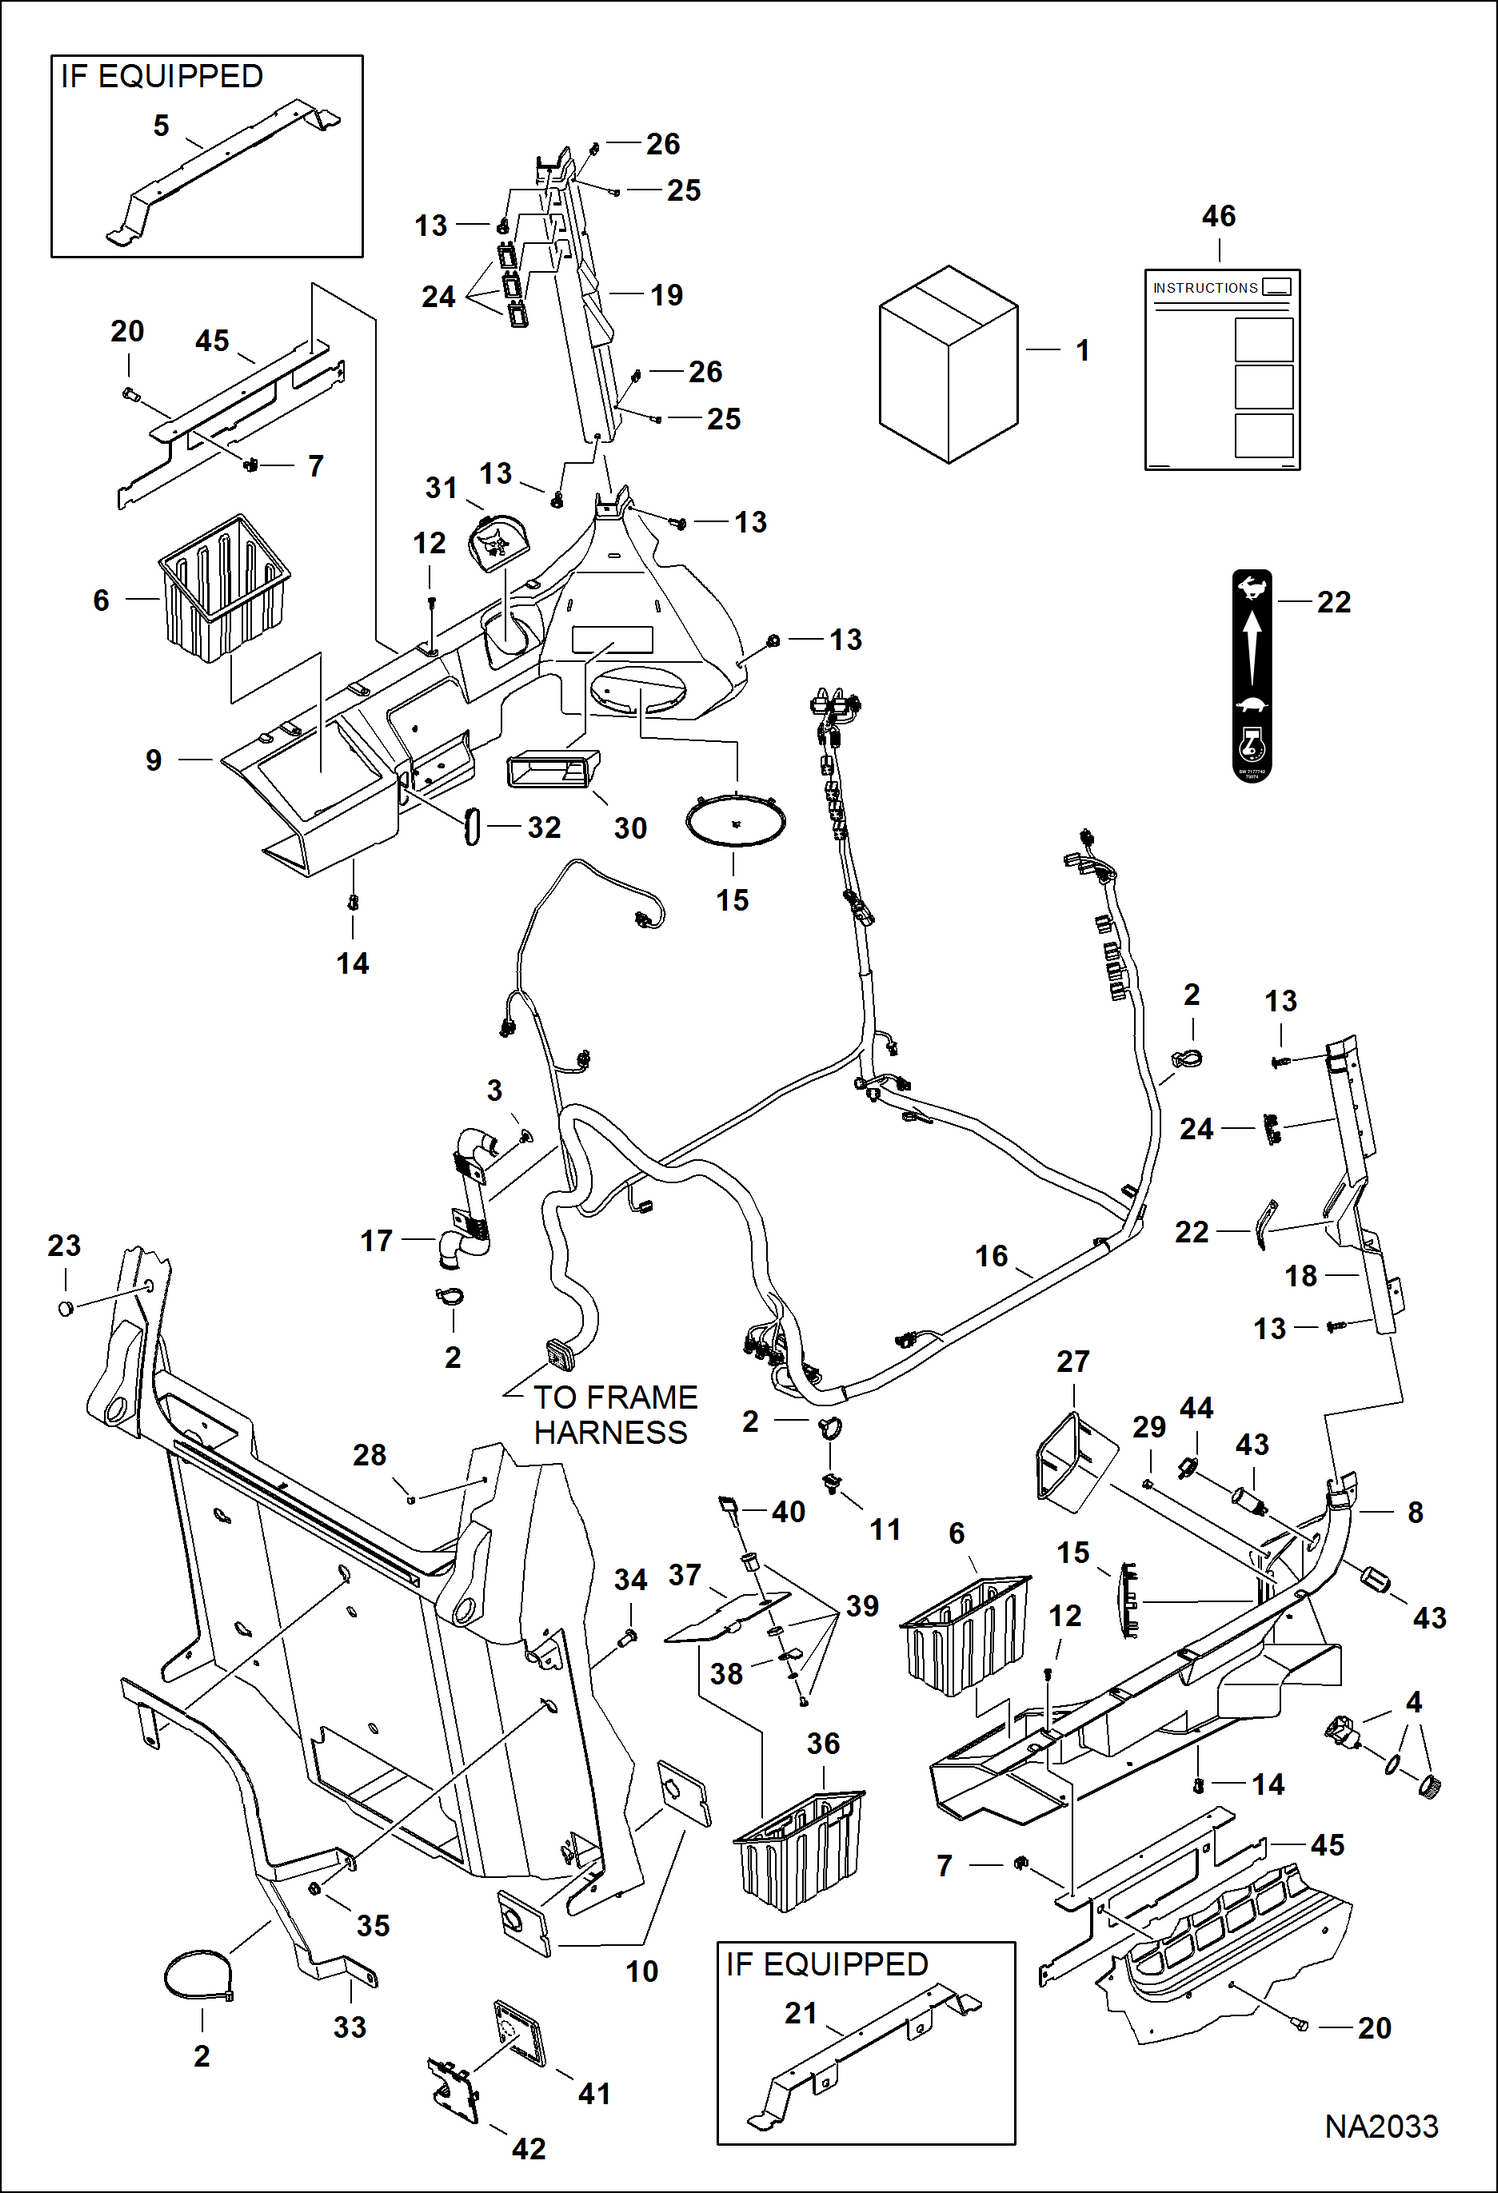 Схема запчастей Bobcat S-Series - DELUXE INTERIOR KIT (1-Connector Harness) (A3NT11001 - 12369, A3NU11001 - 11111) ACCESSORIES & OPTIONS